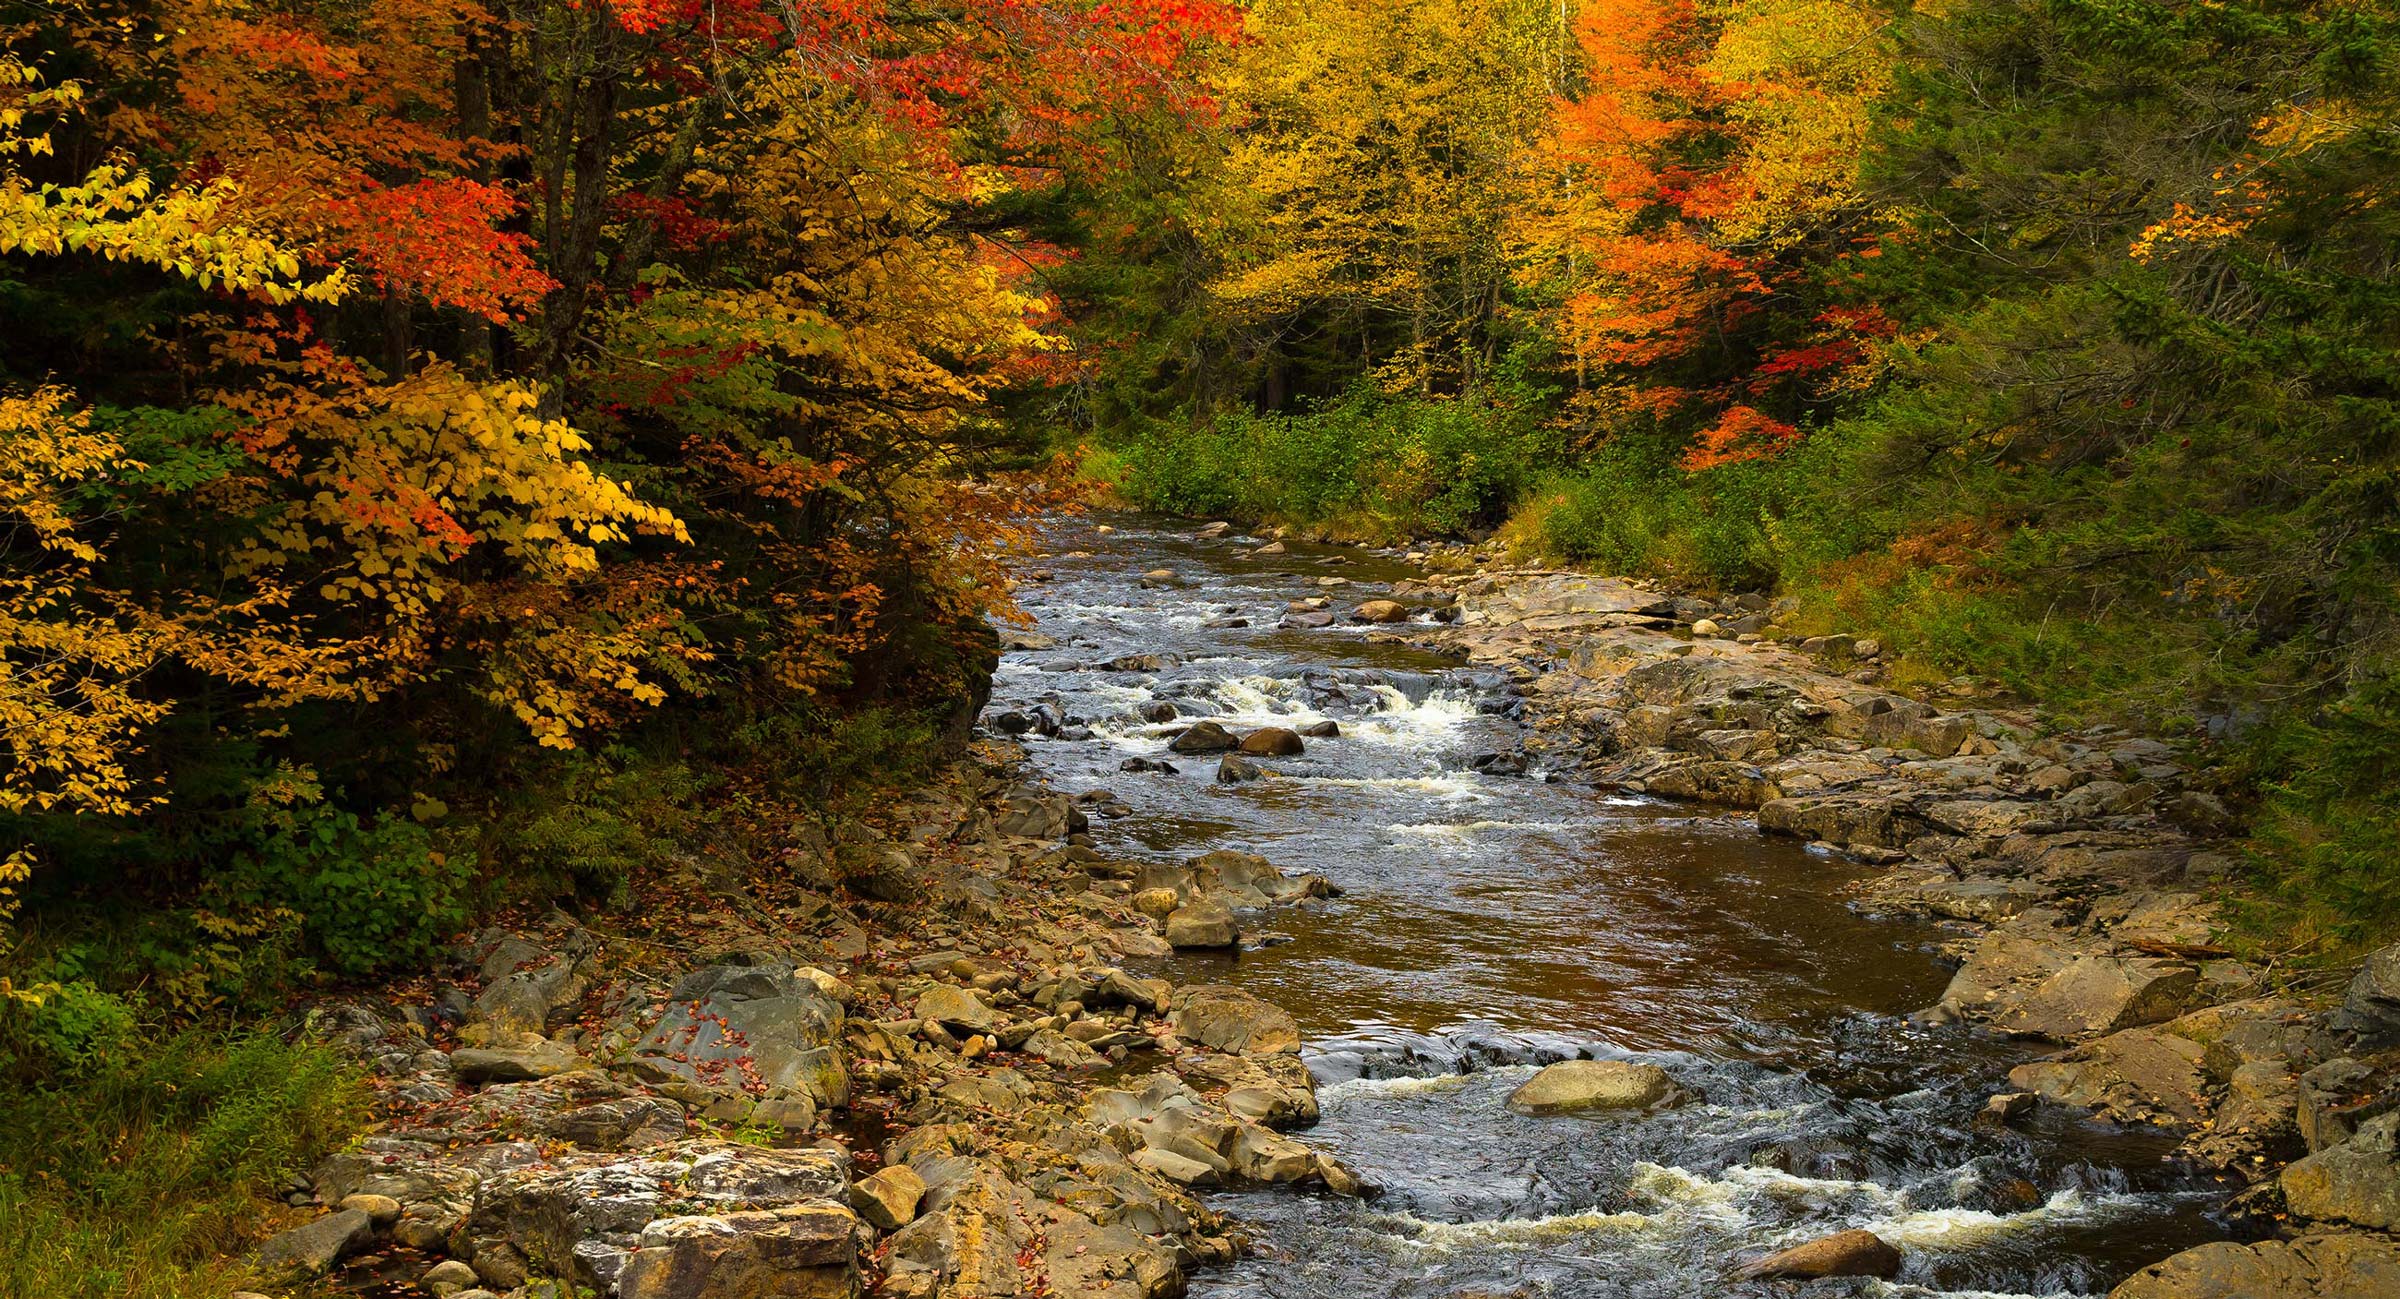 Fall foliage along the Nulhegan River in northeastern Vermont.